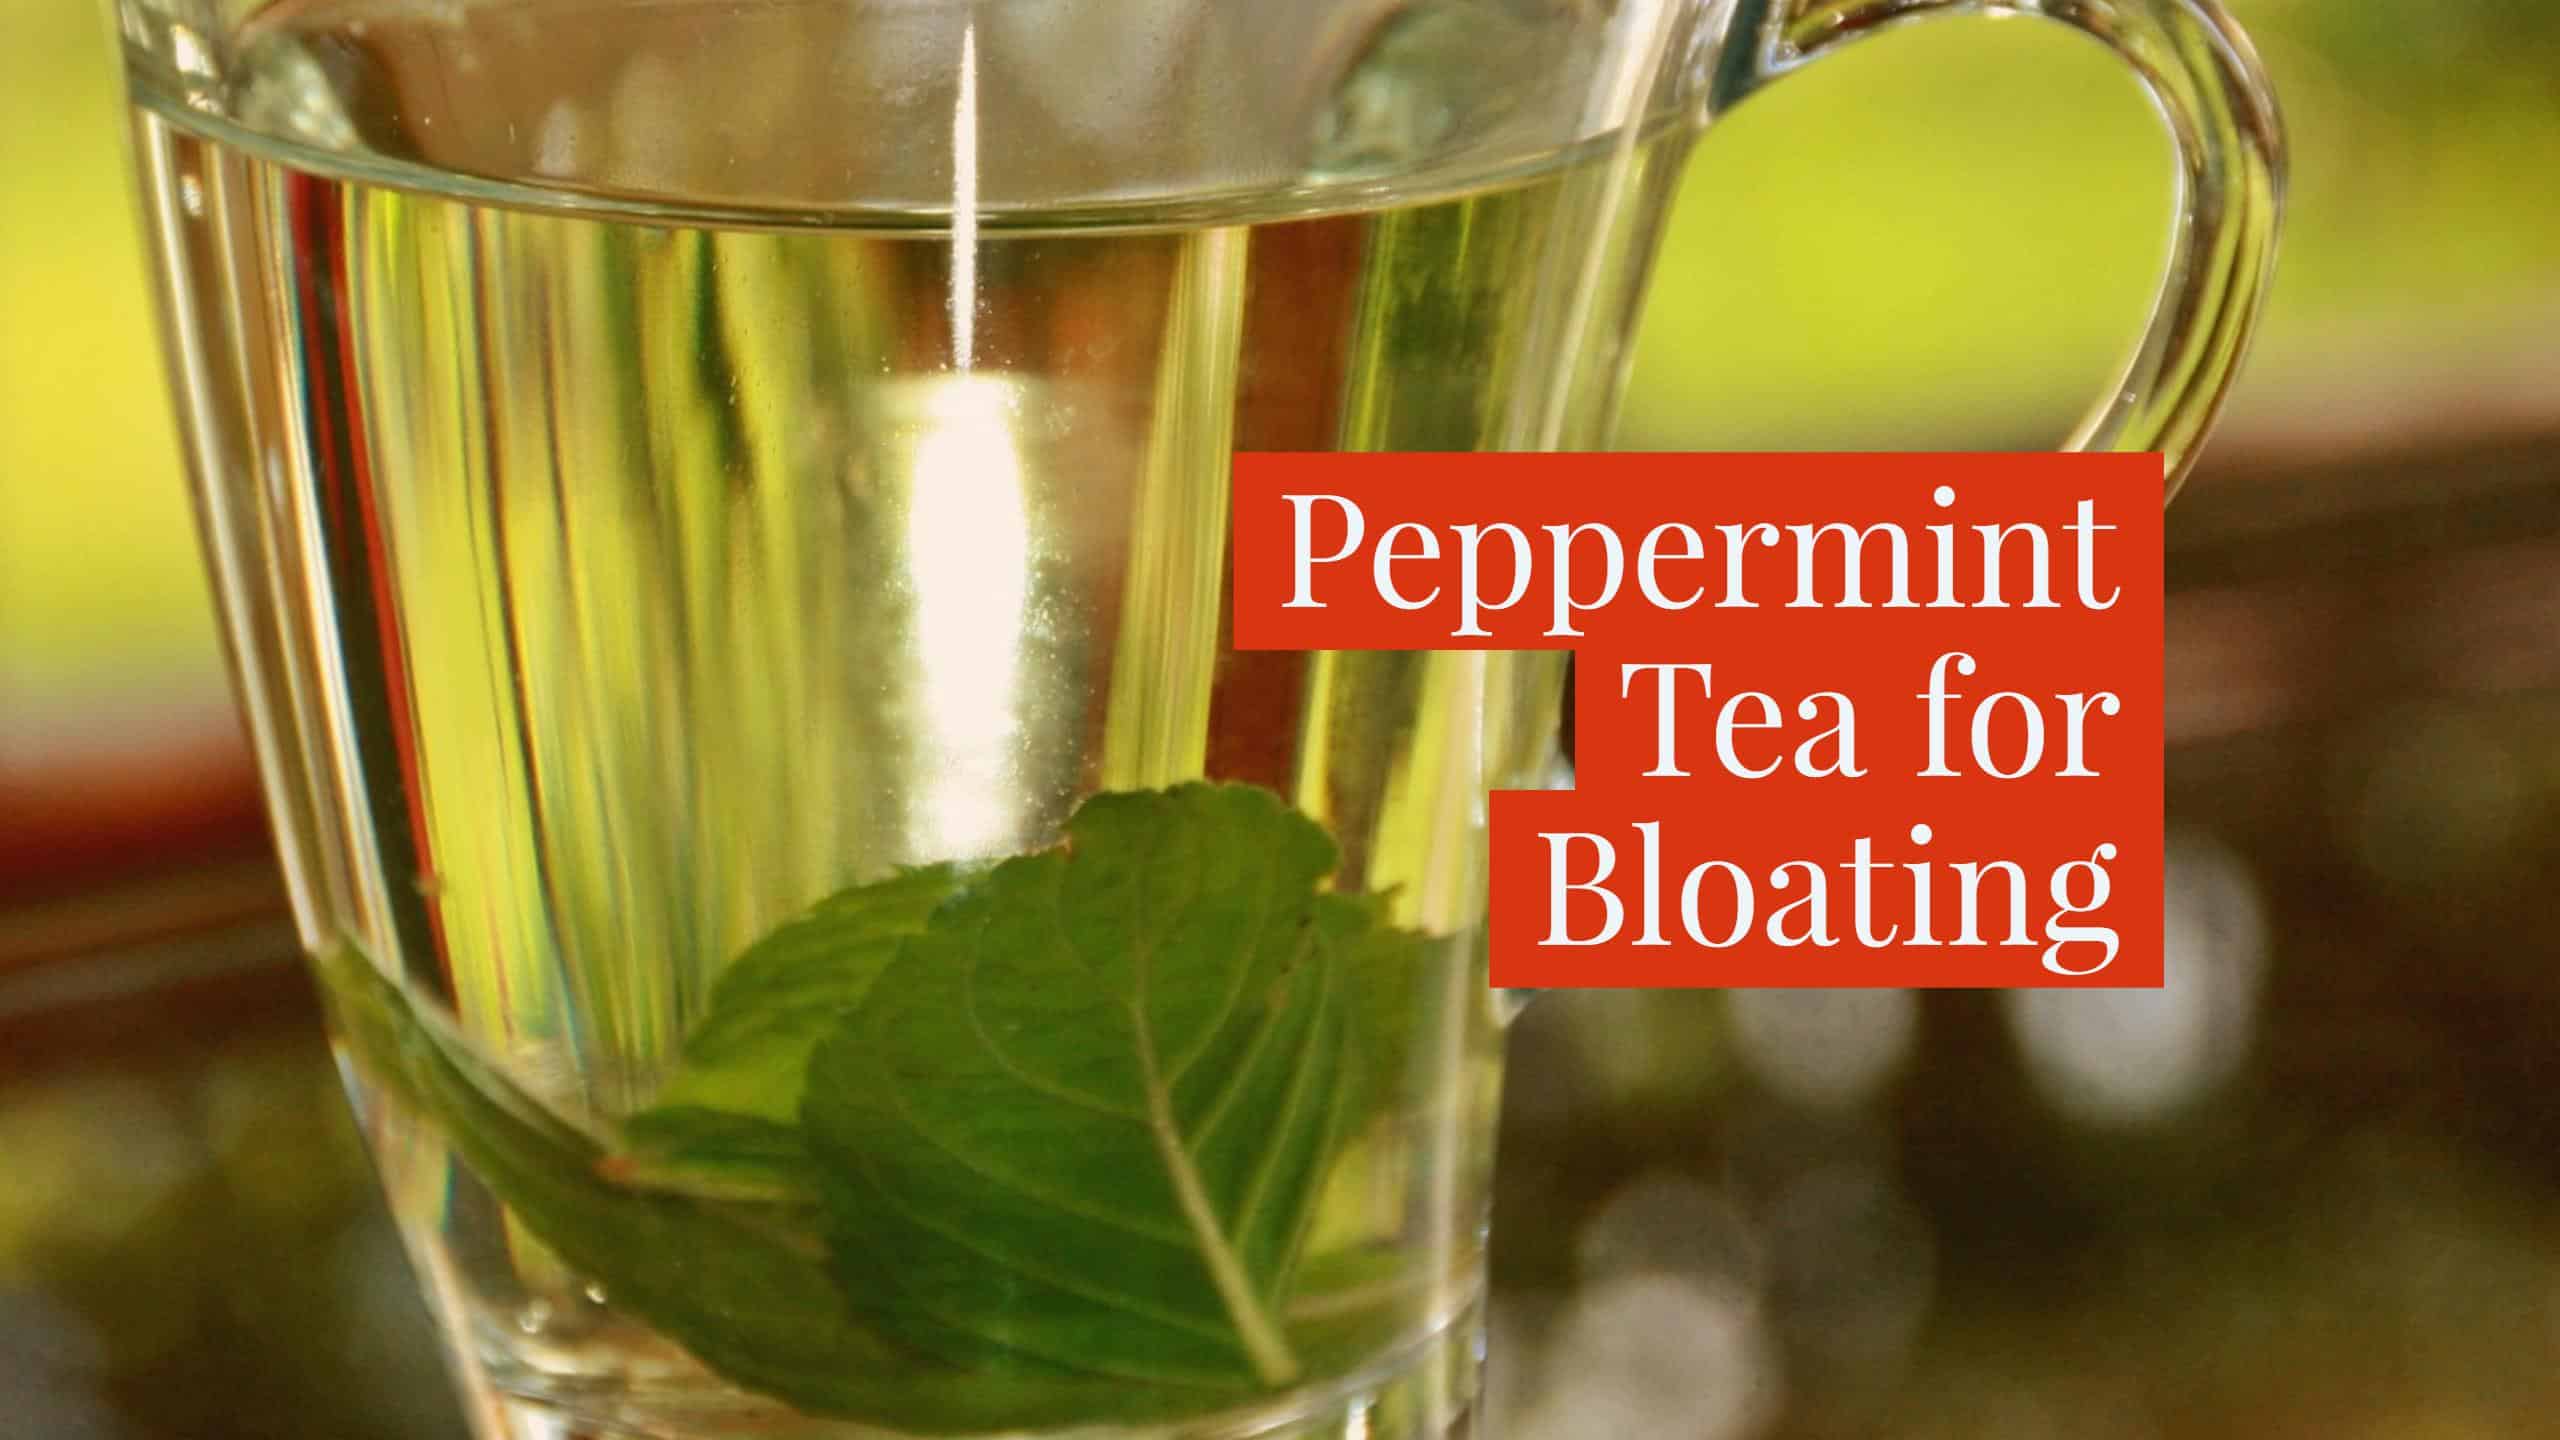 How to use Peppermint Tea for Bloating